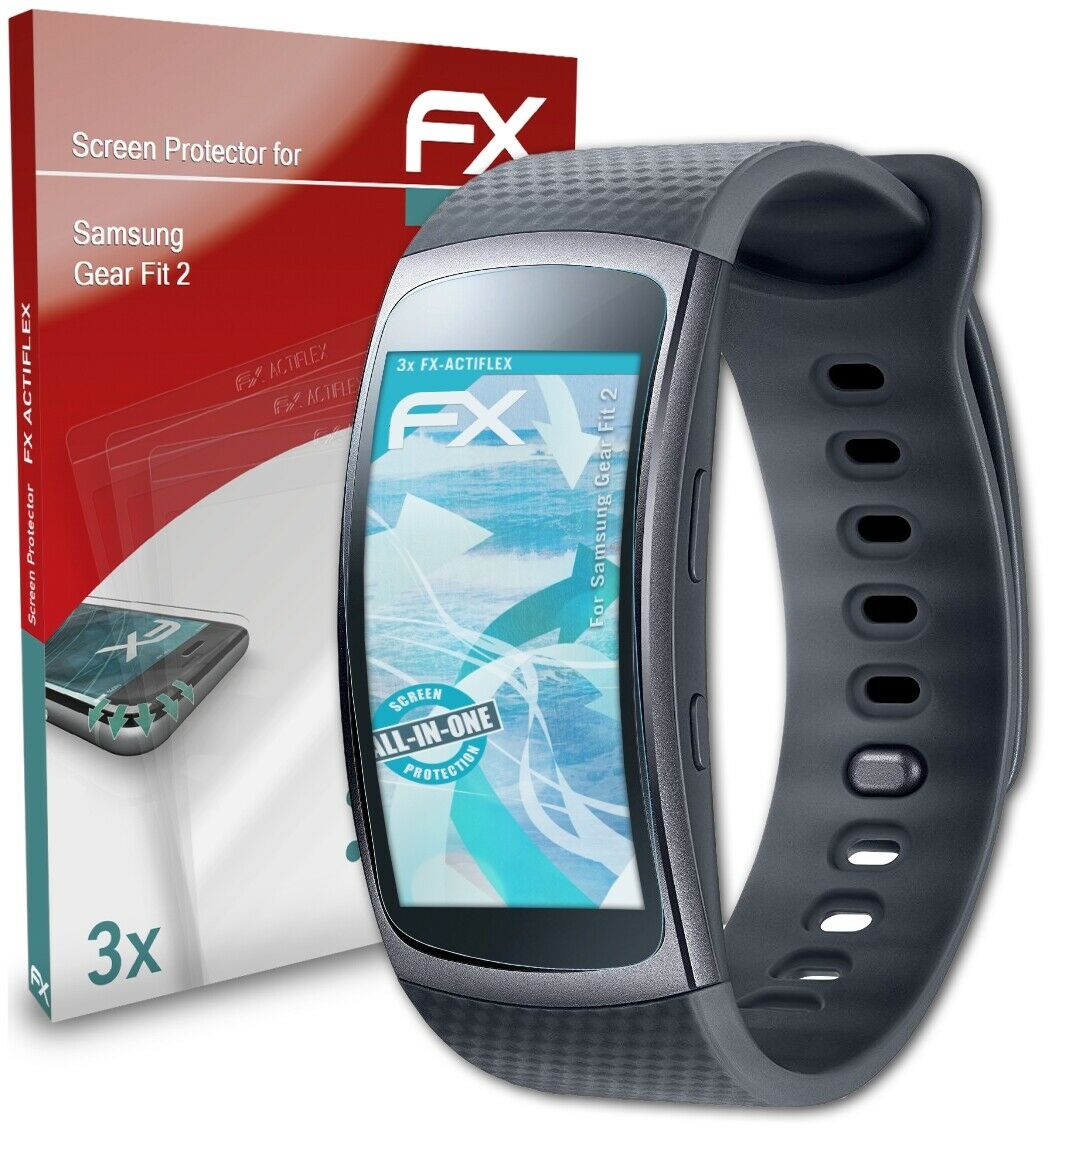 atFoliX 3x Protective Film for Samsung Gear Fit 2 clear&flexible